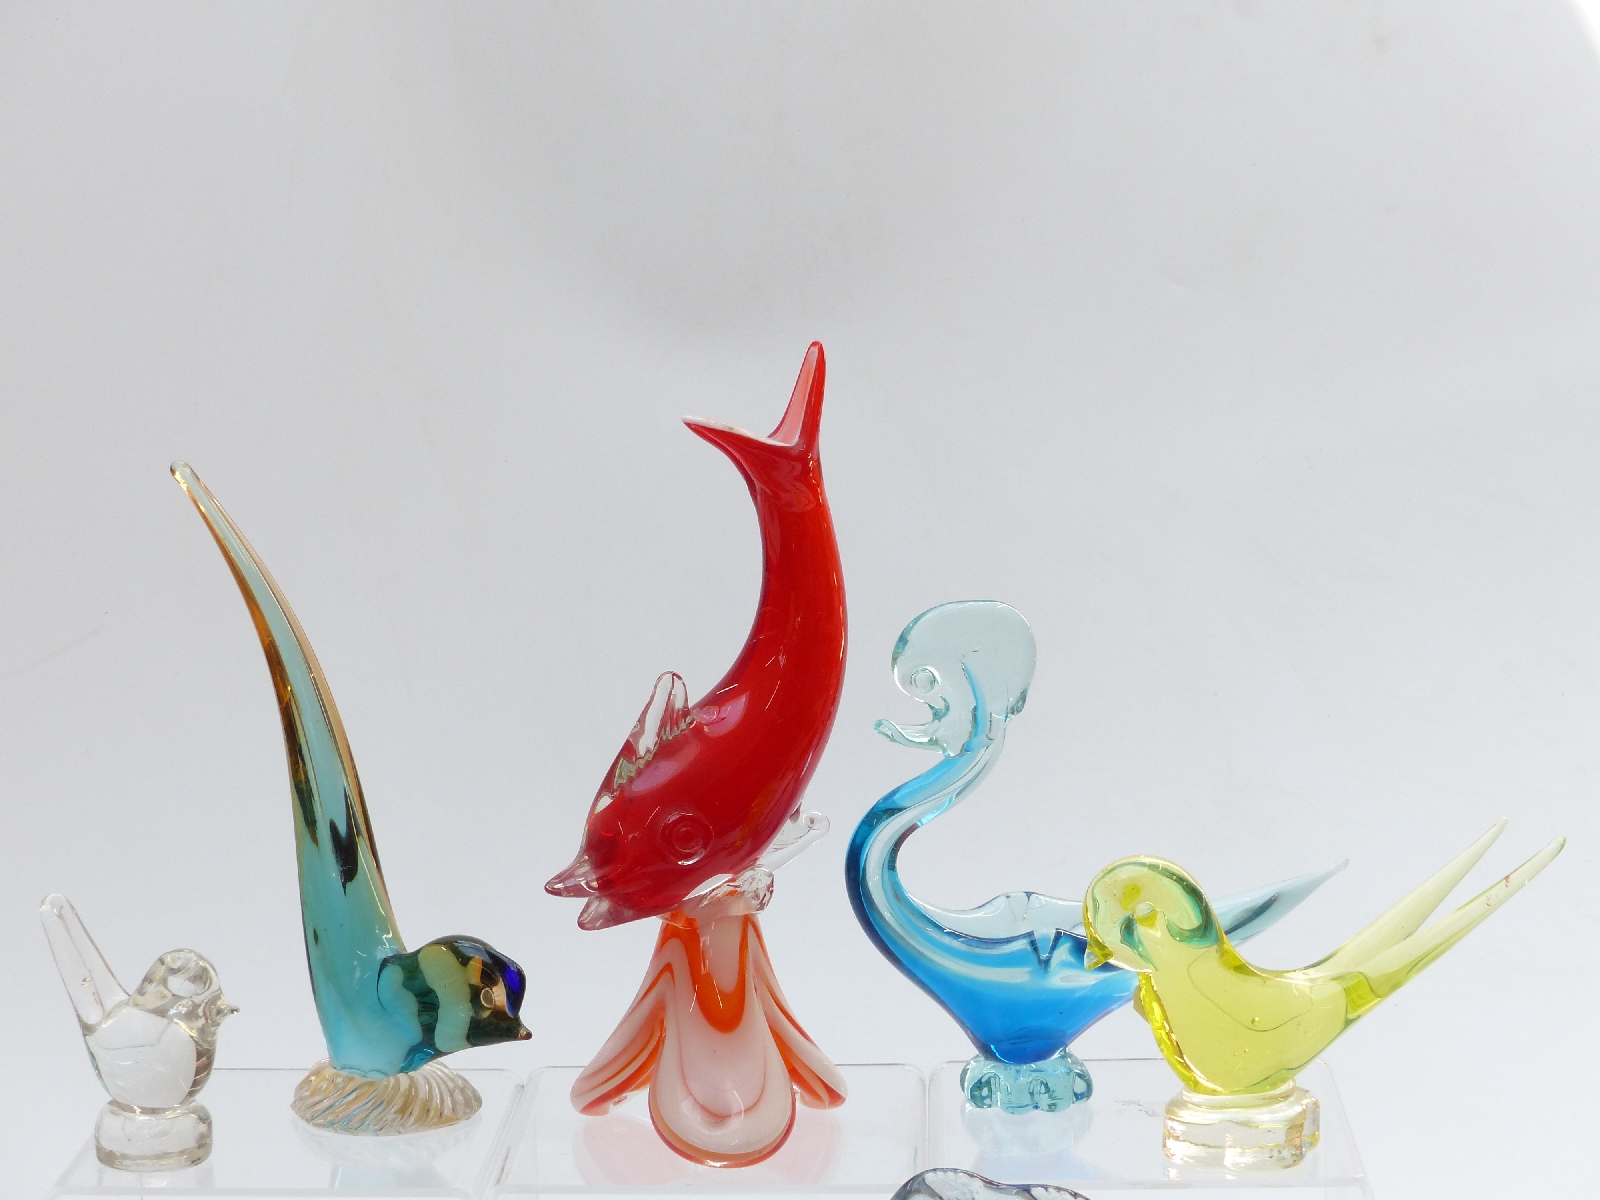 Ten Murano style glass fish and birds with one bird by Liskeard Glass, largest 51cm long - Image 2 of 2